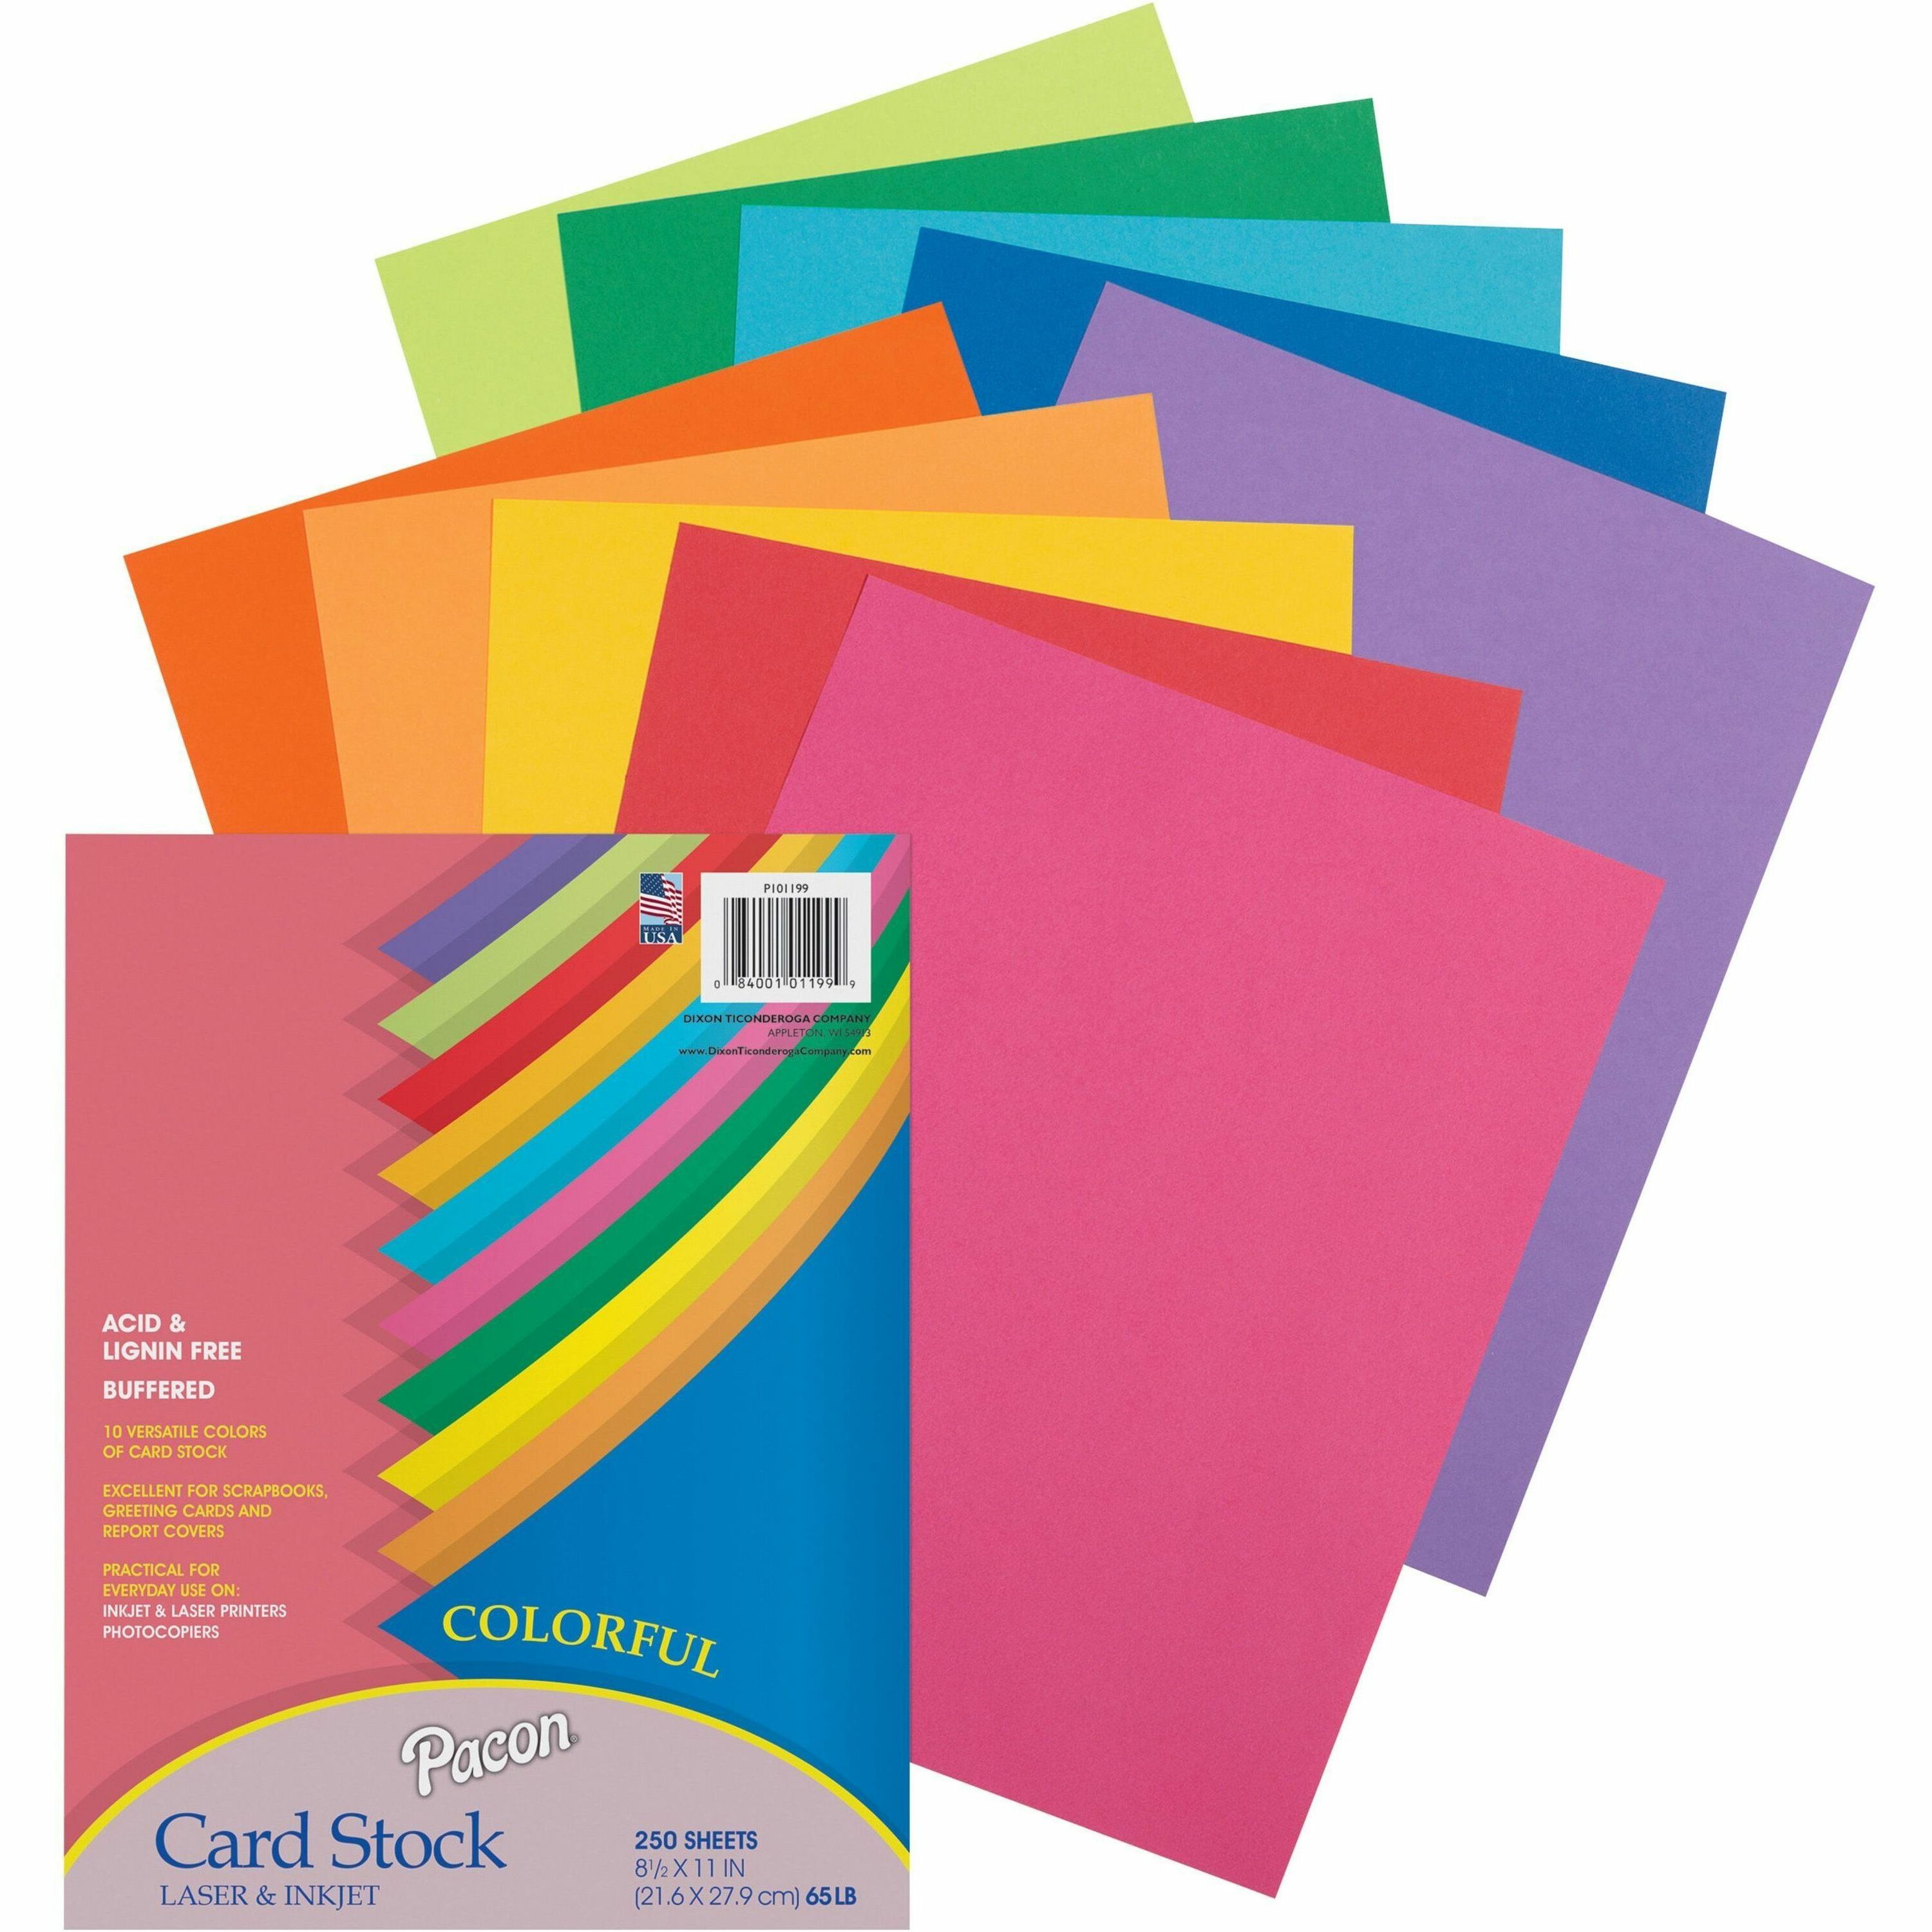 Assorted Pastel Colored Cardstock – Assortment of 10 Colors for Arts &  Crafts, Invitations, Flyers, Posters, Decorations | 67lb Vellum Bristol